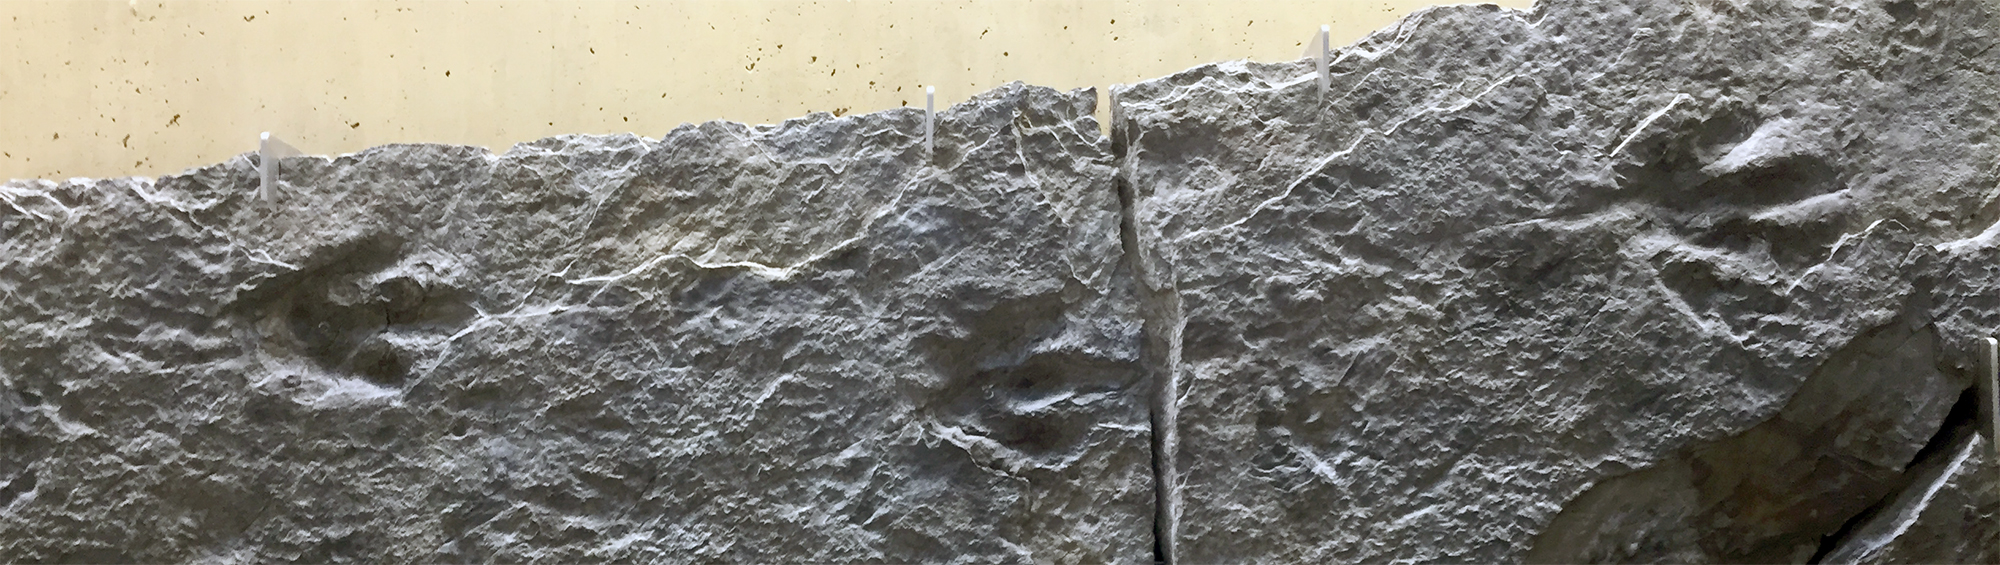 Jurassic-aged dinosaur footprints on display in Snee Hall on the Cornell University camps. These were collected from Connecticut or Massachusetts.